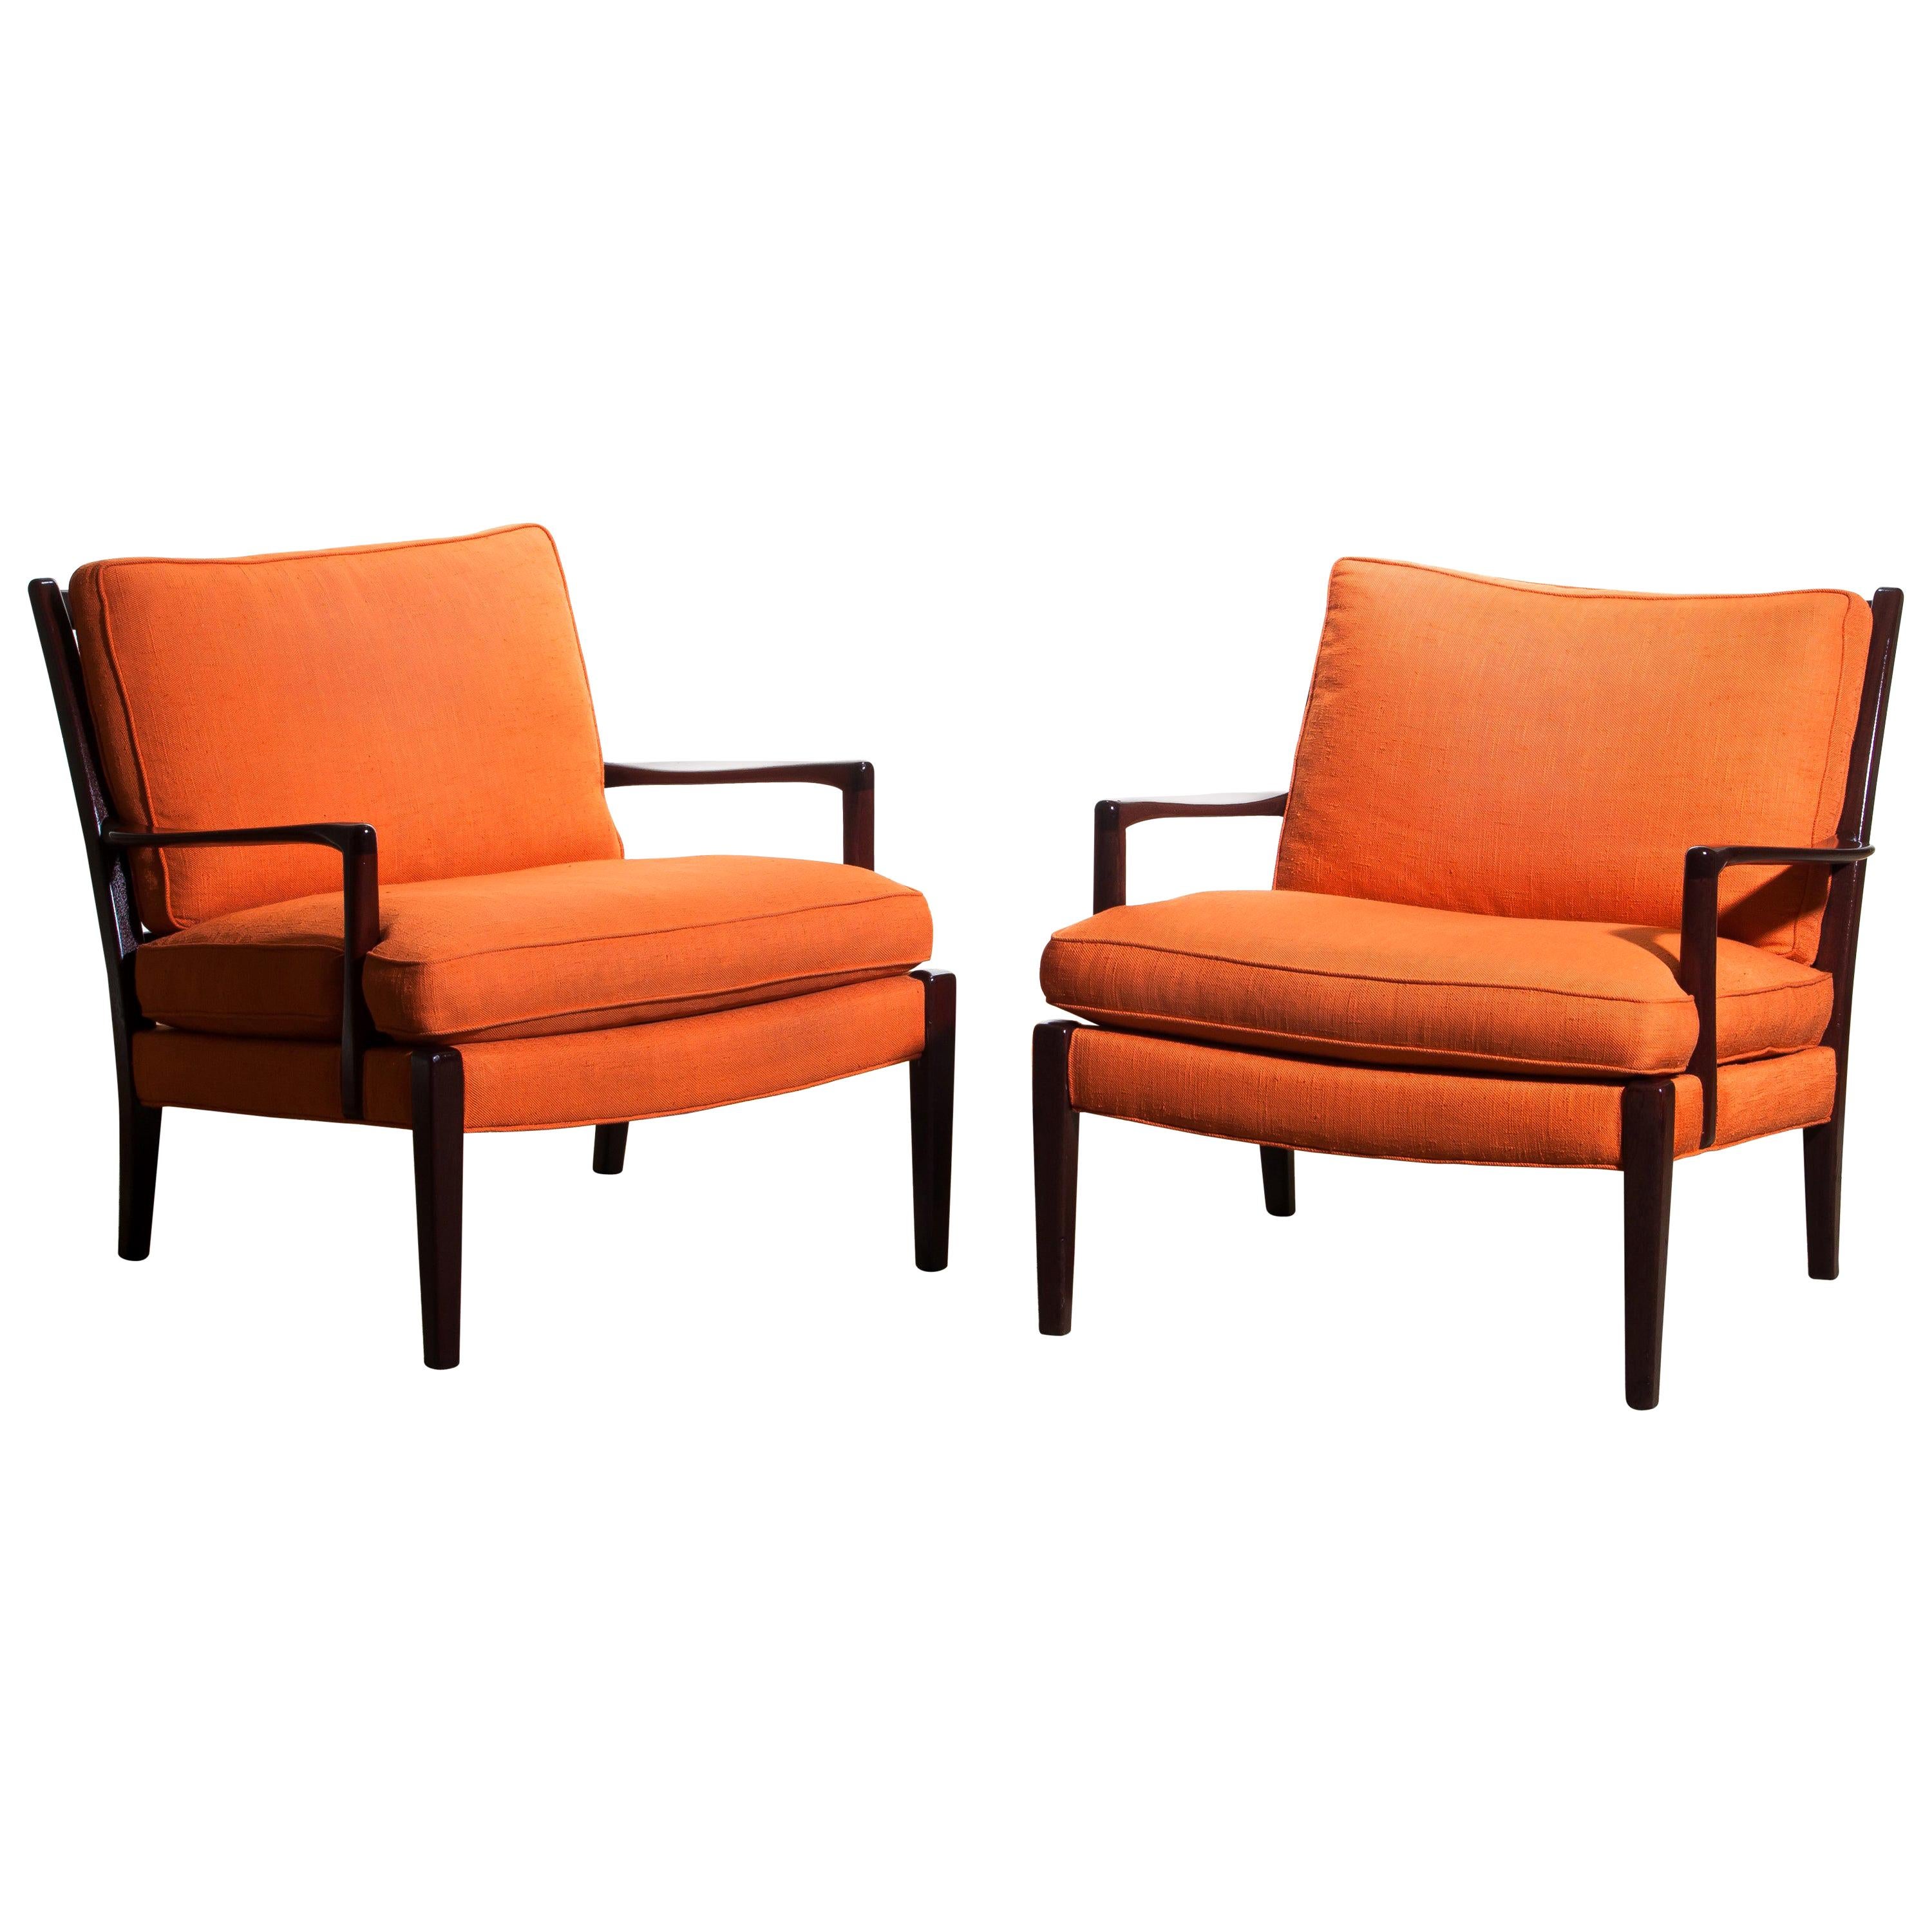 1960s, Pair of Orange Linen Easy / Lounge Chairs "Löven" by Arne Norell, Sweden